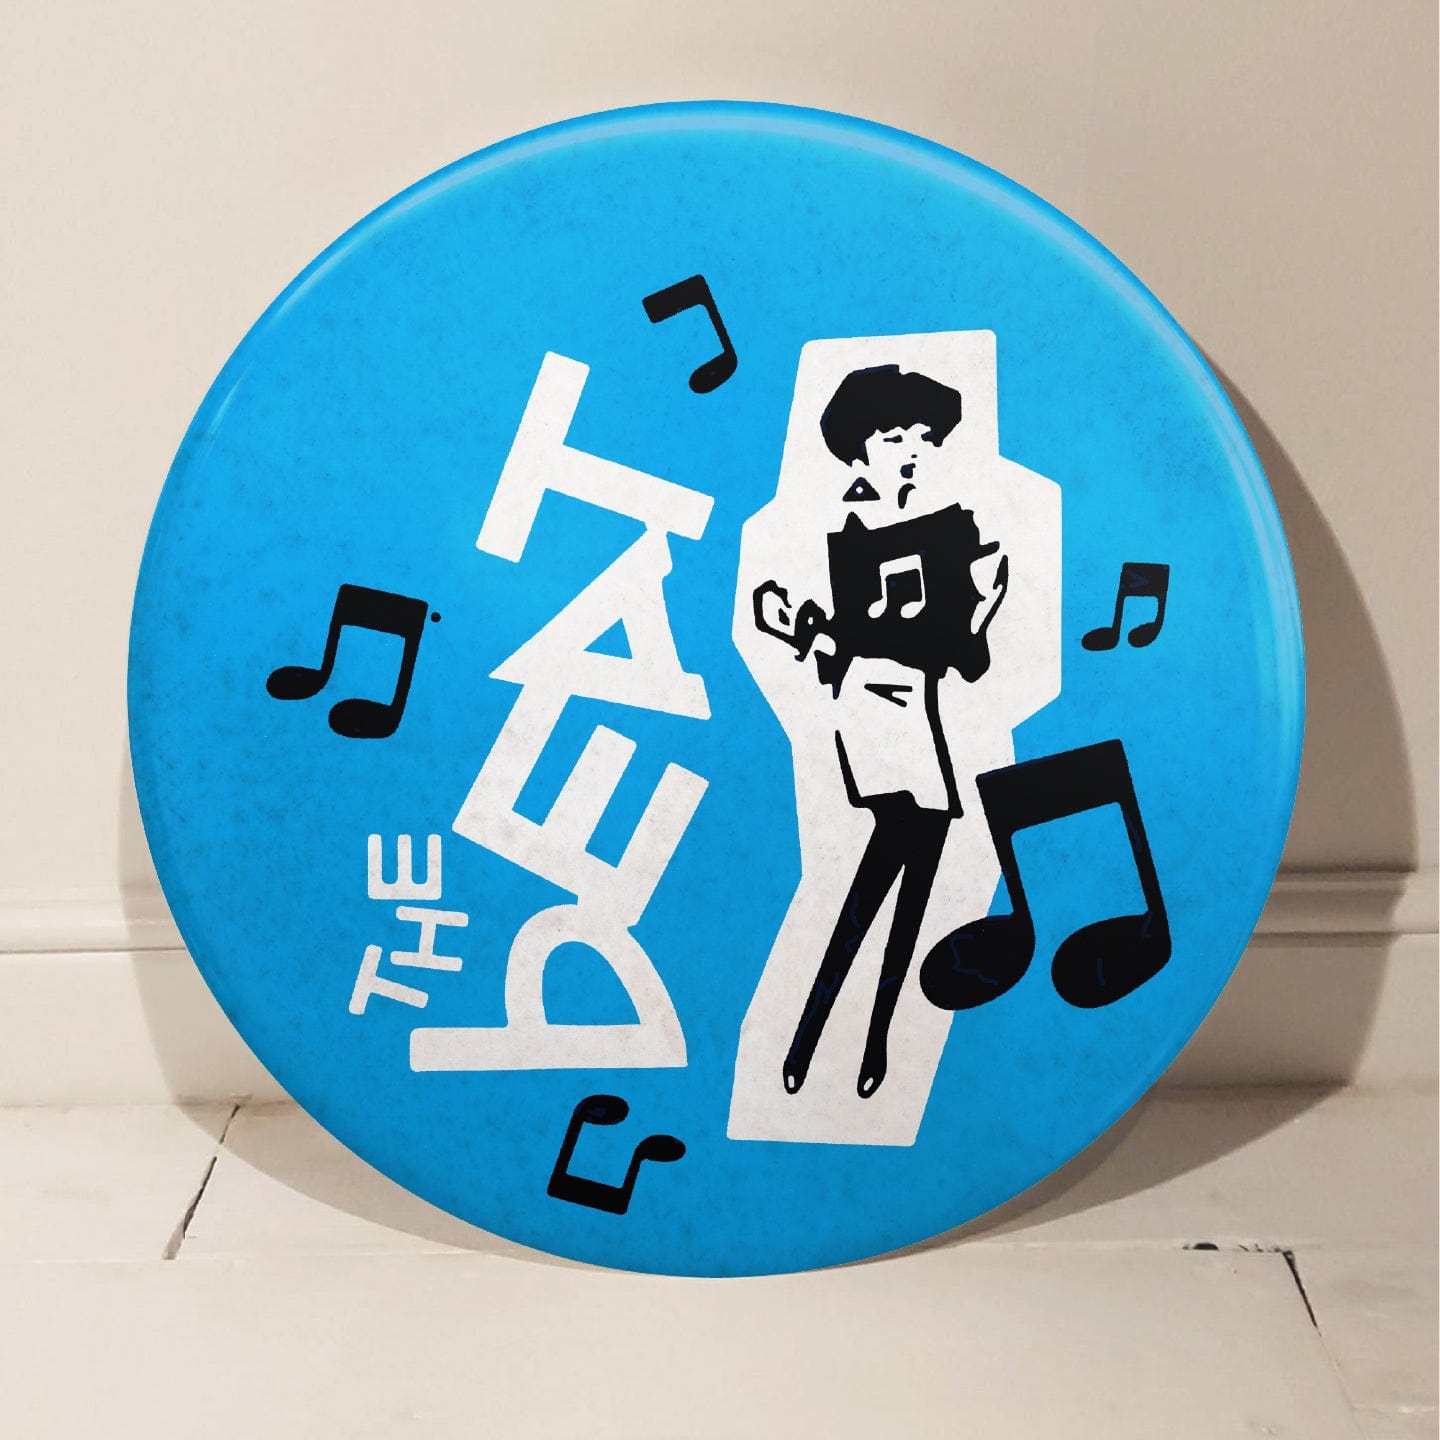 The Beat - Giant 3D Vintage Pin Badge Enlarged